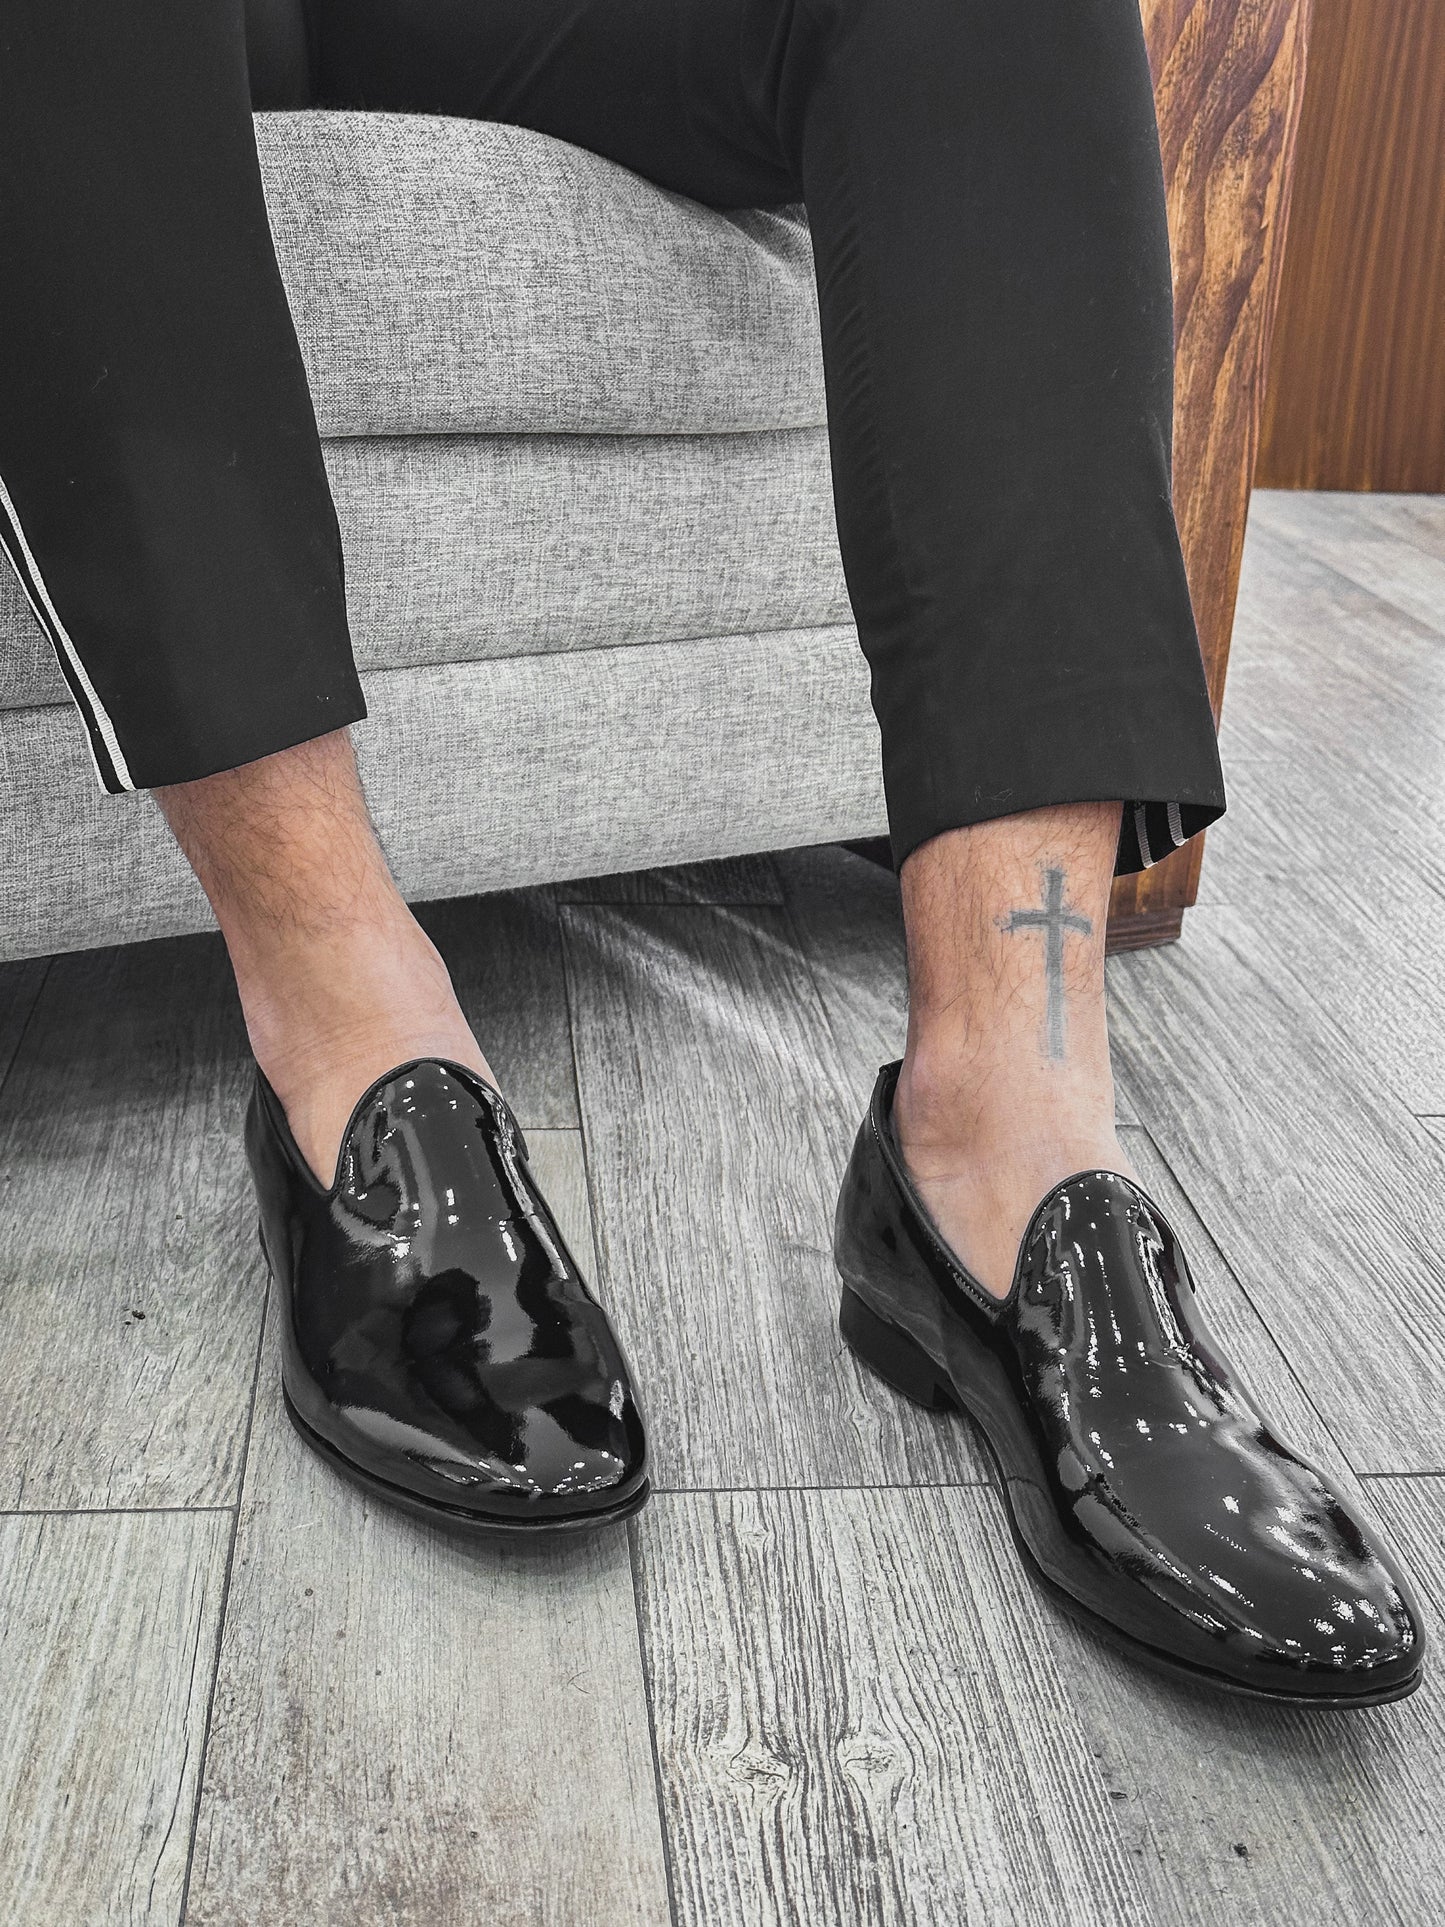 PATENT LOAFER